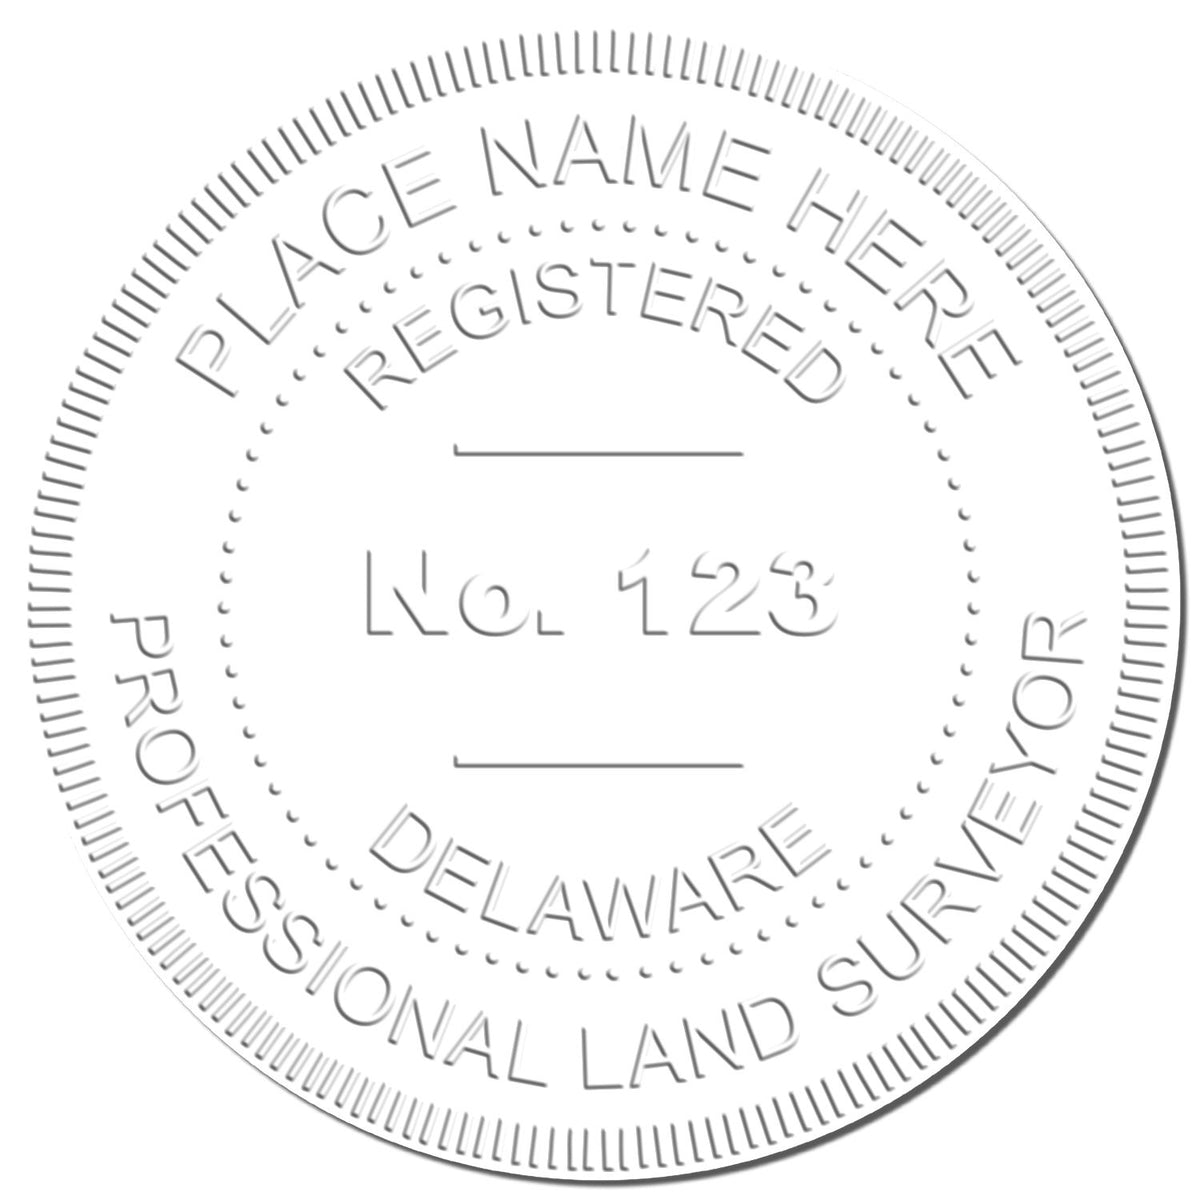 This paper is stamped with a sample imprint of the Long Reach Delaware Land Surveyor Seal, signifying its quality and reliability.